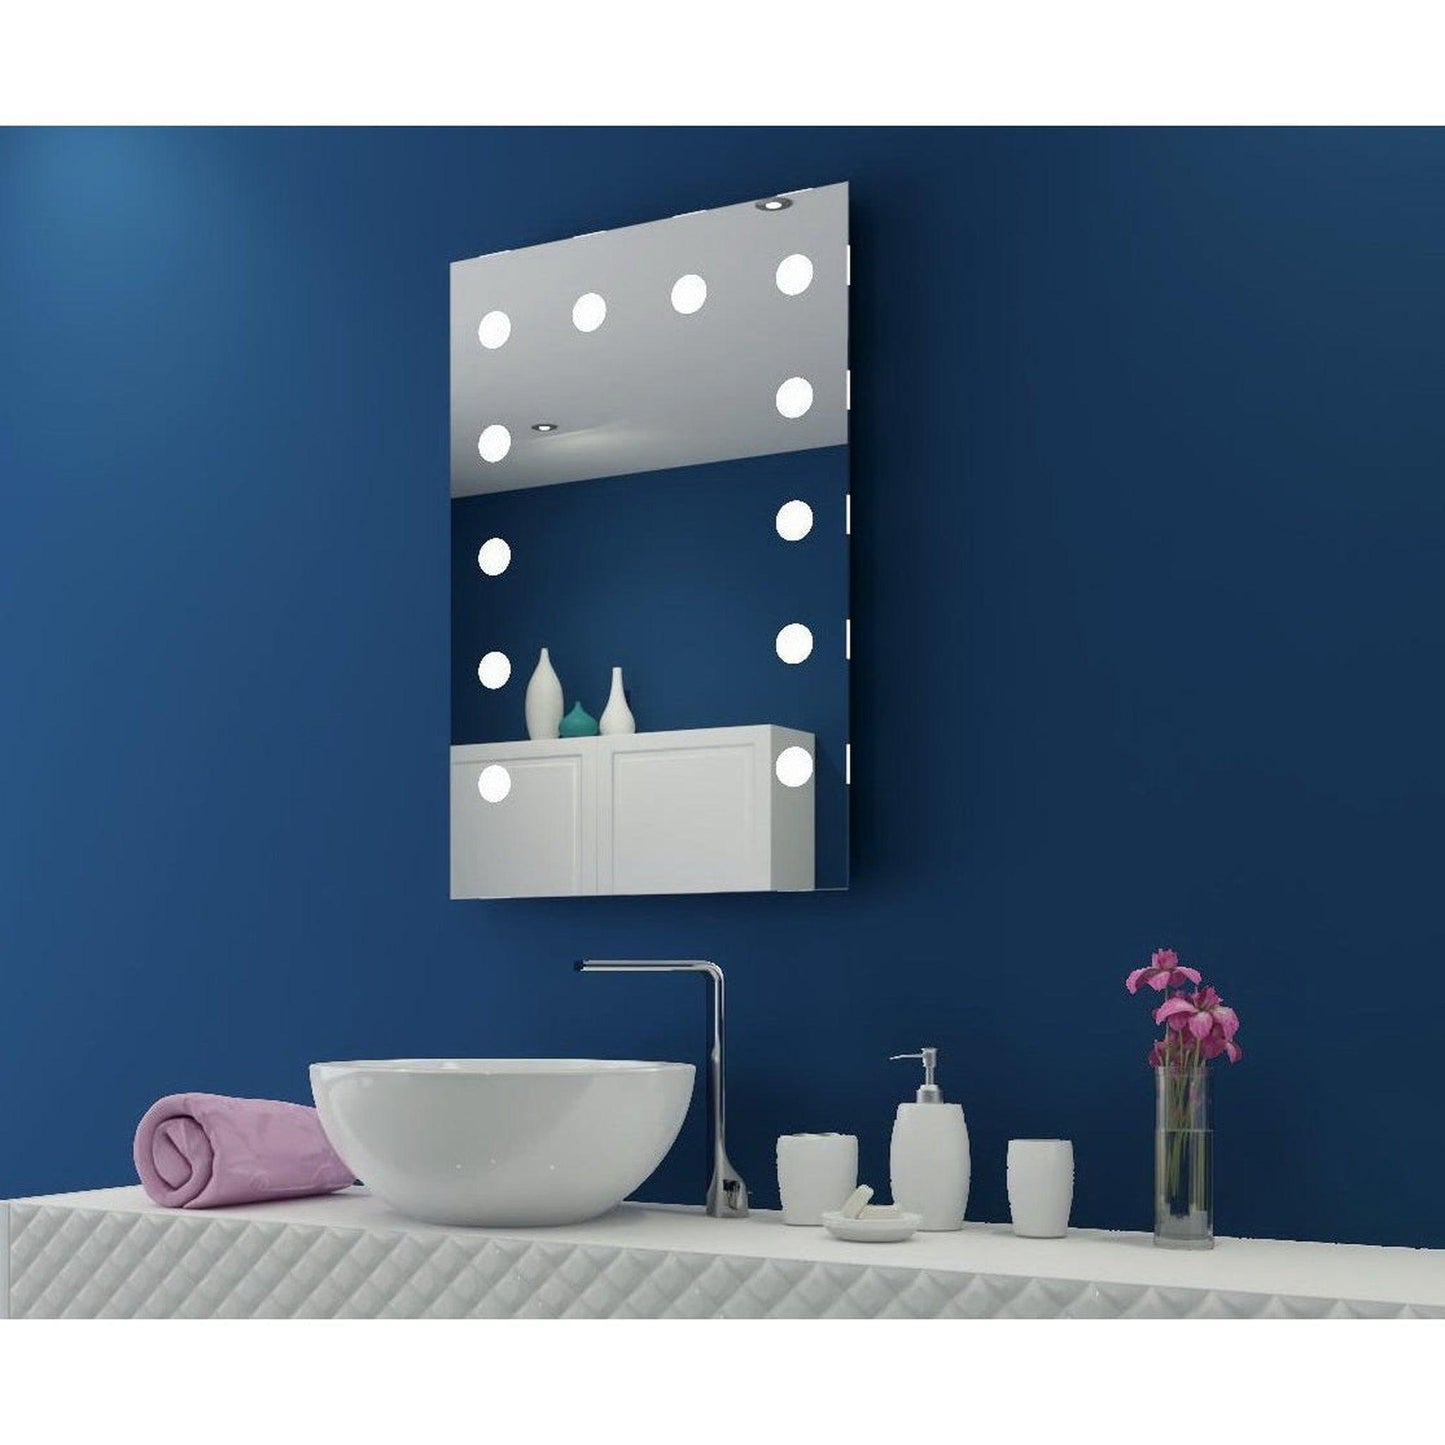 Paris Mirror Hollywood 24" x 36" Front-Lit Lighted Super Bright Dimmable Wall-Mounted 3000K LED Mirror